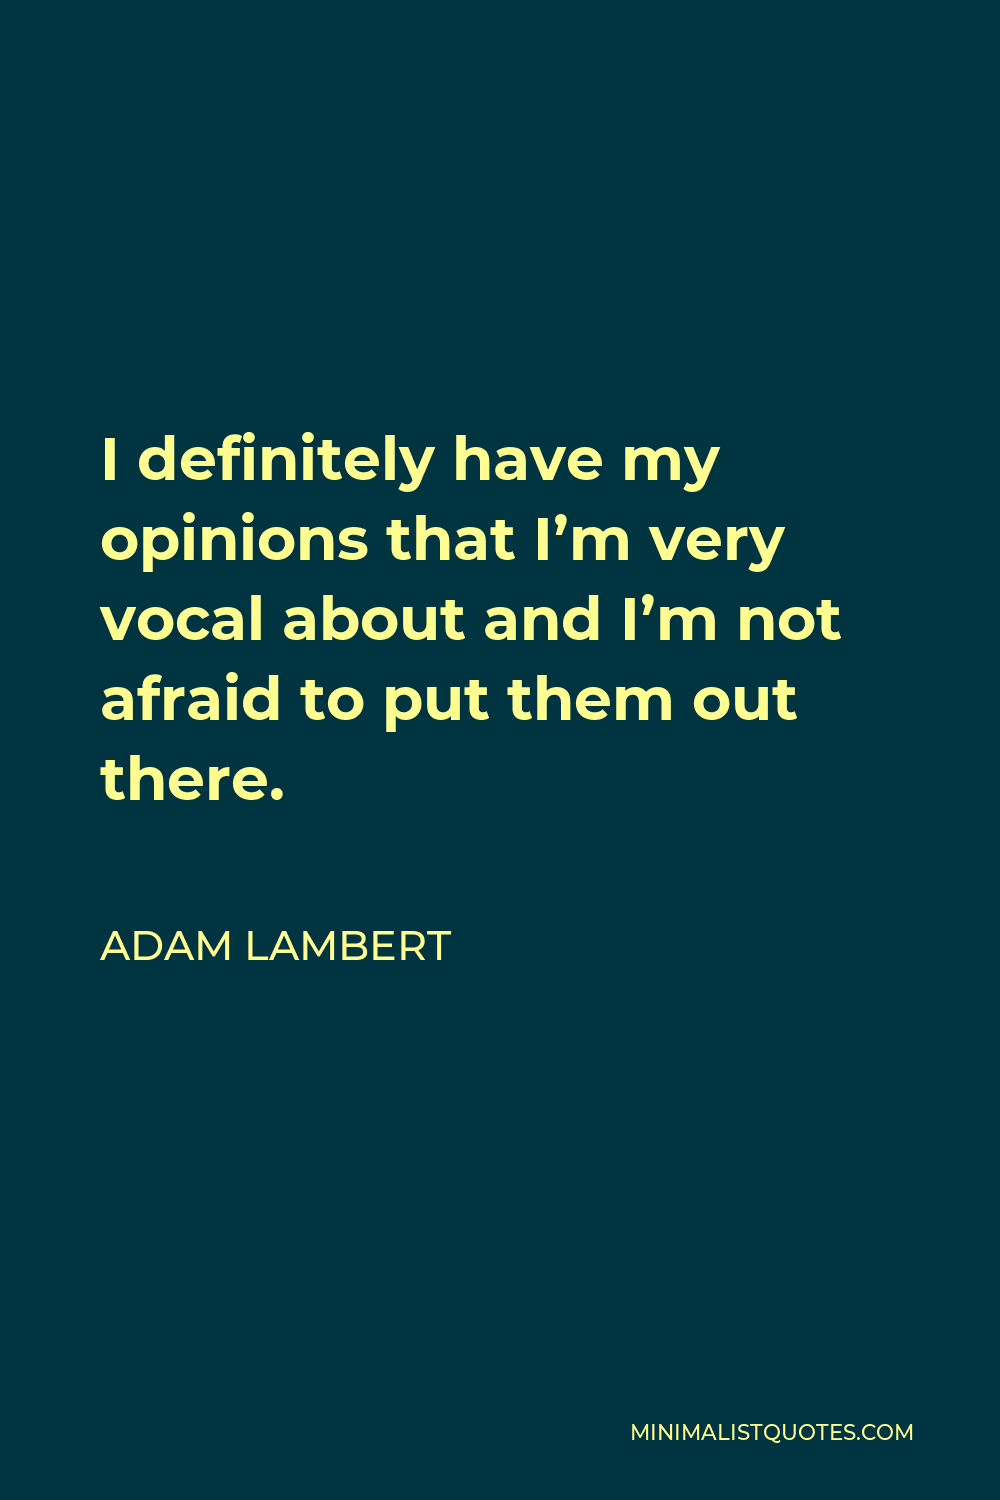 Adam Lambert Quote - I definitely have my opinions that I’m very vocal about and I’m not afraid to put them out there.